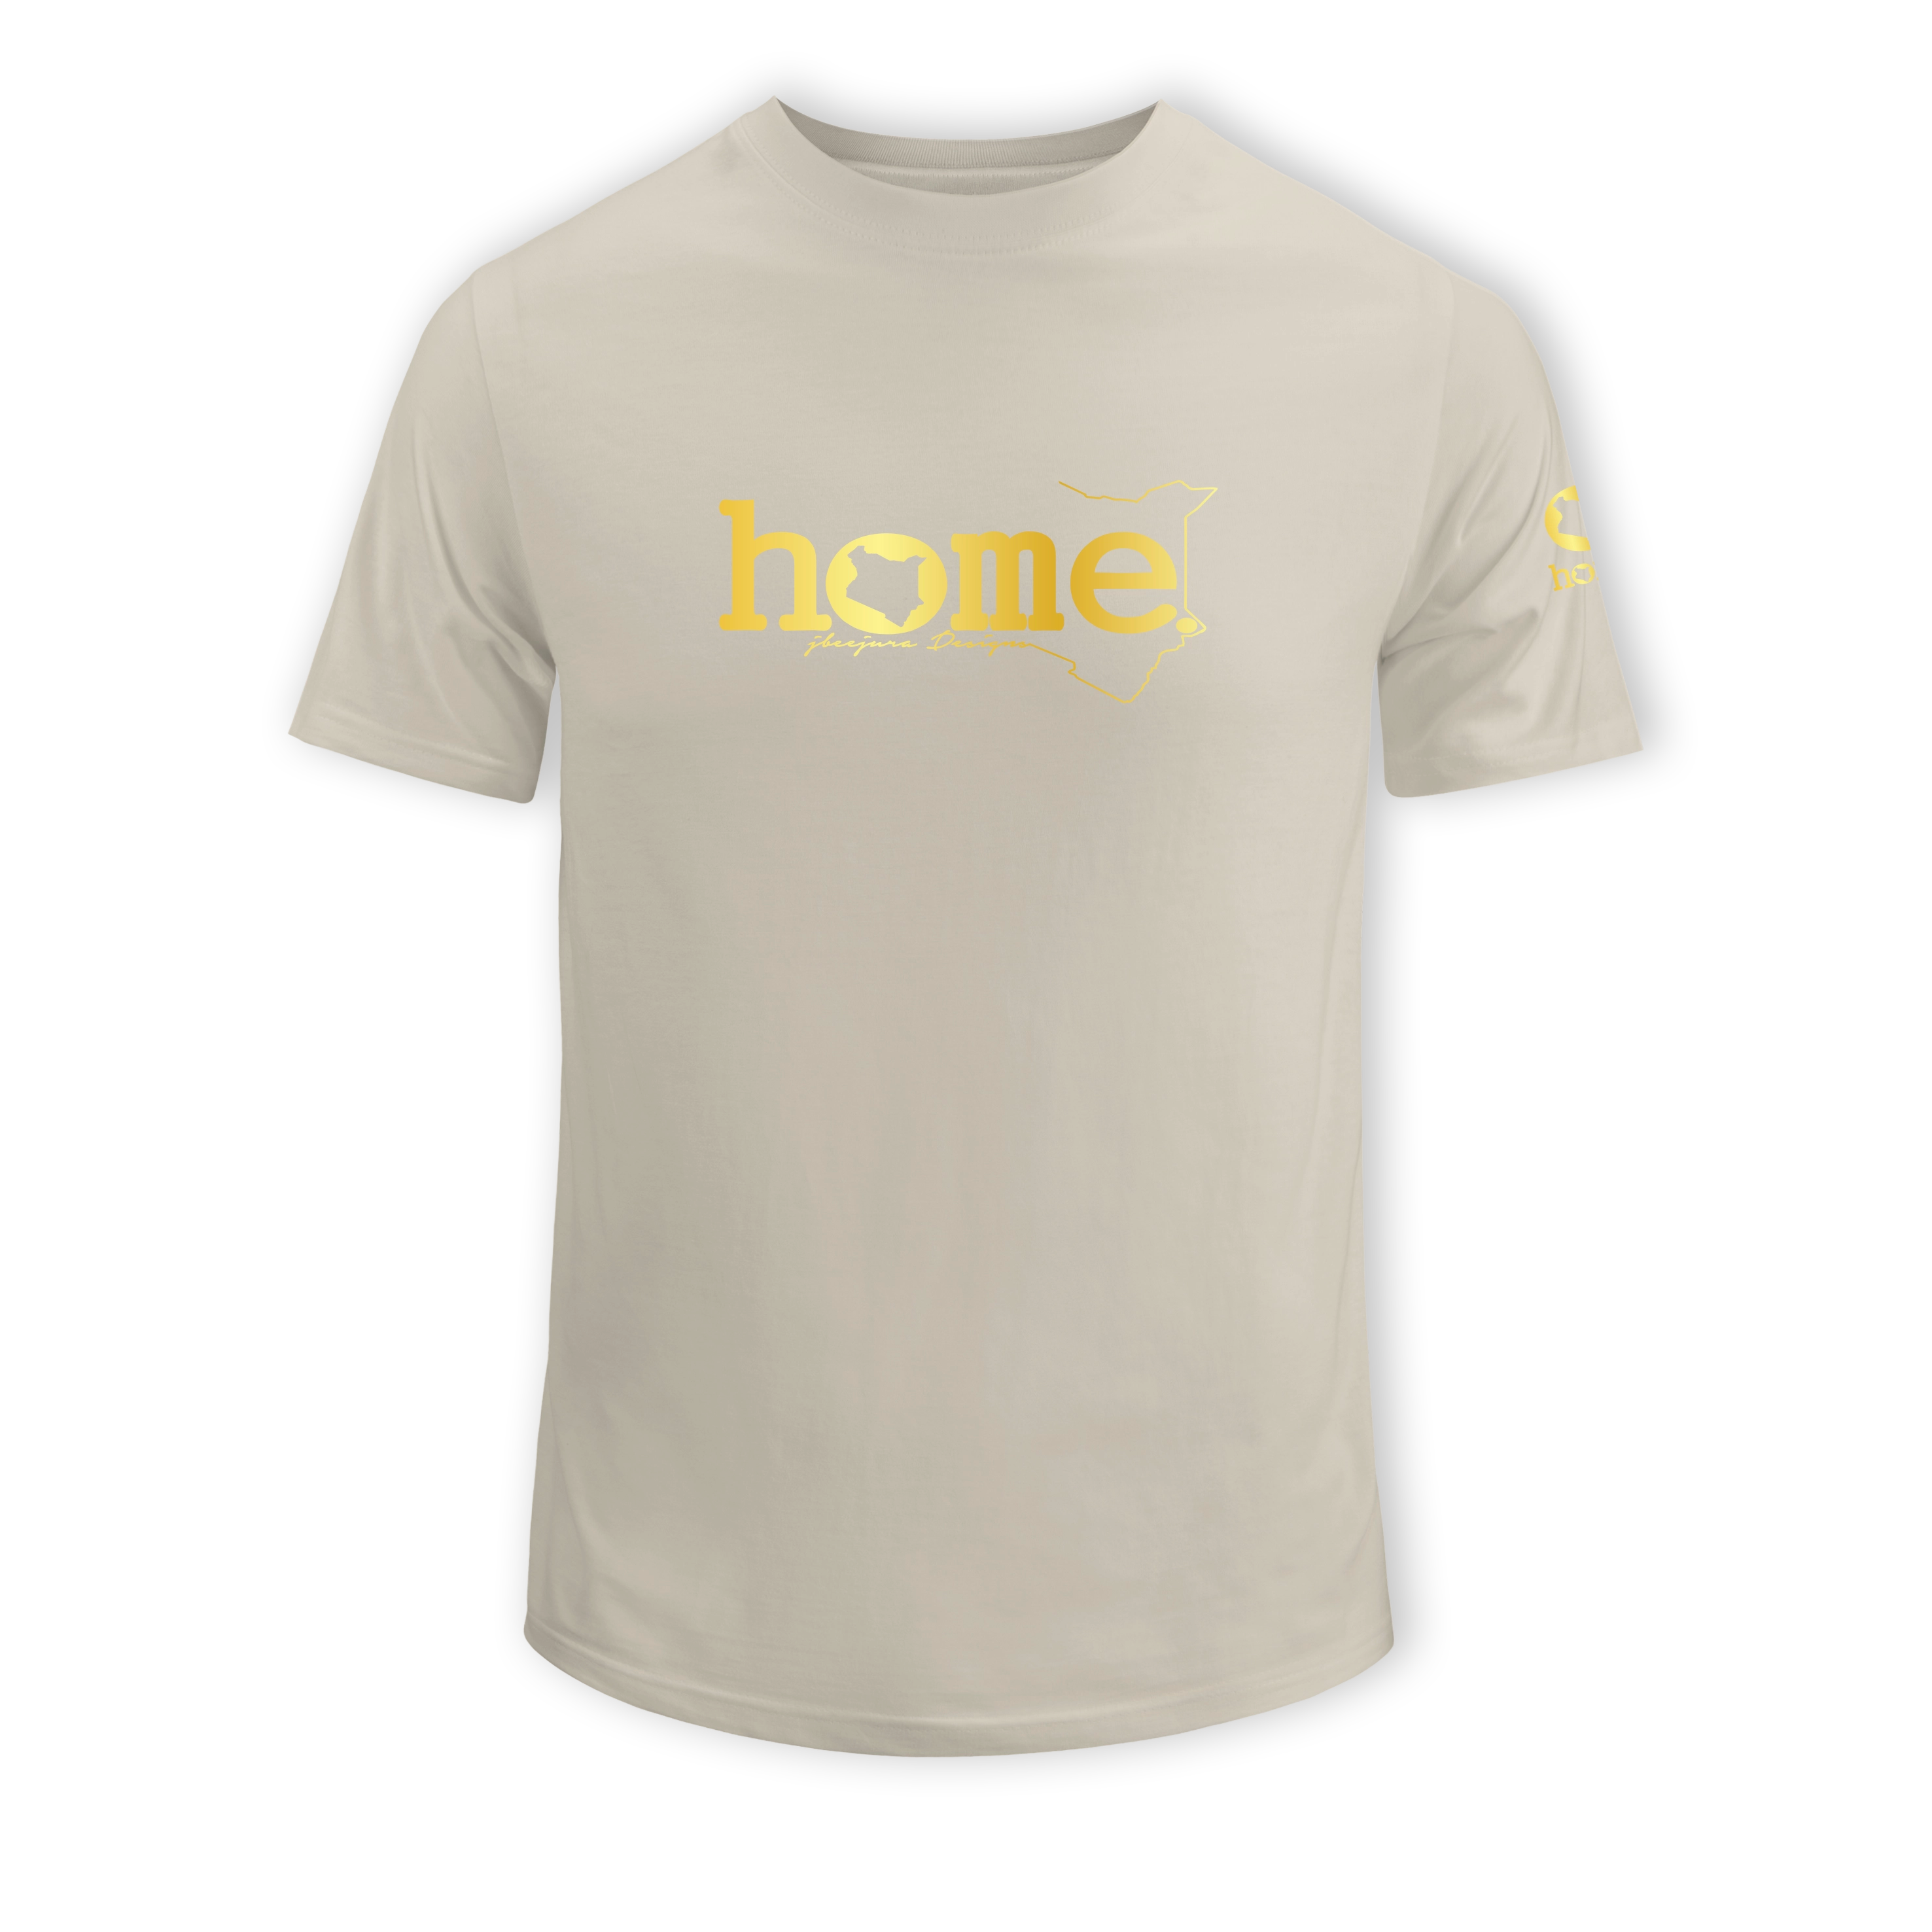 home_254 SHORT-SLEEVED NUDE T-SHIRT WITH A GOLD CLASSIC WORDS PRINT – COTTON PLUS FABRIC